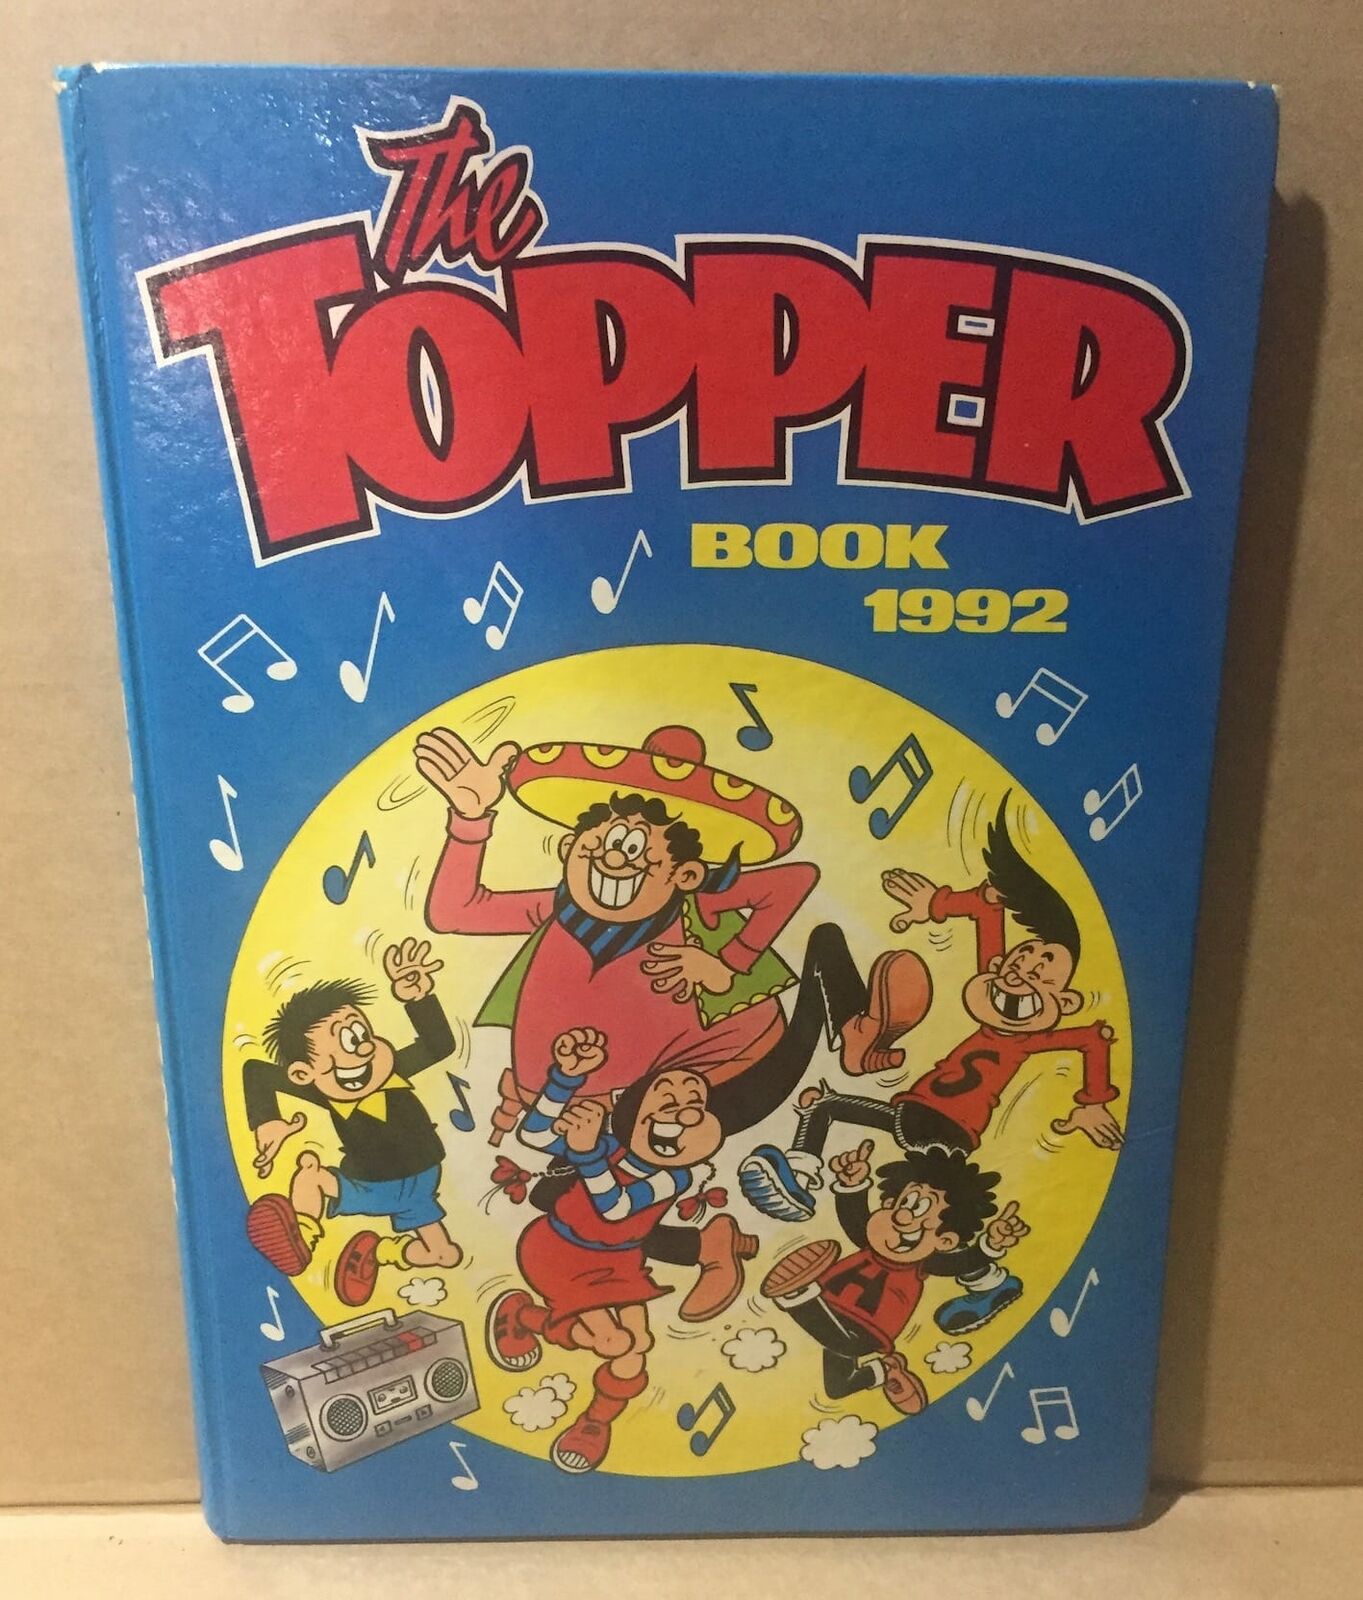 HARD COVER BOOK - THE TOPPER BOOK 1992